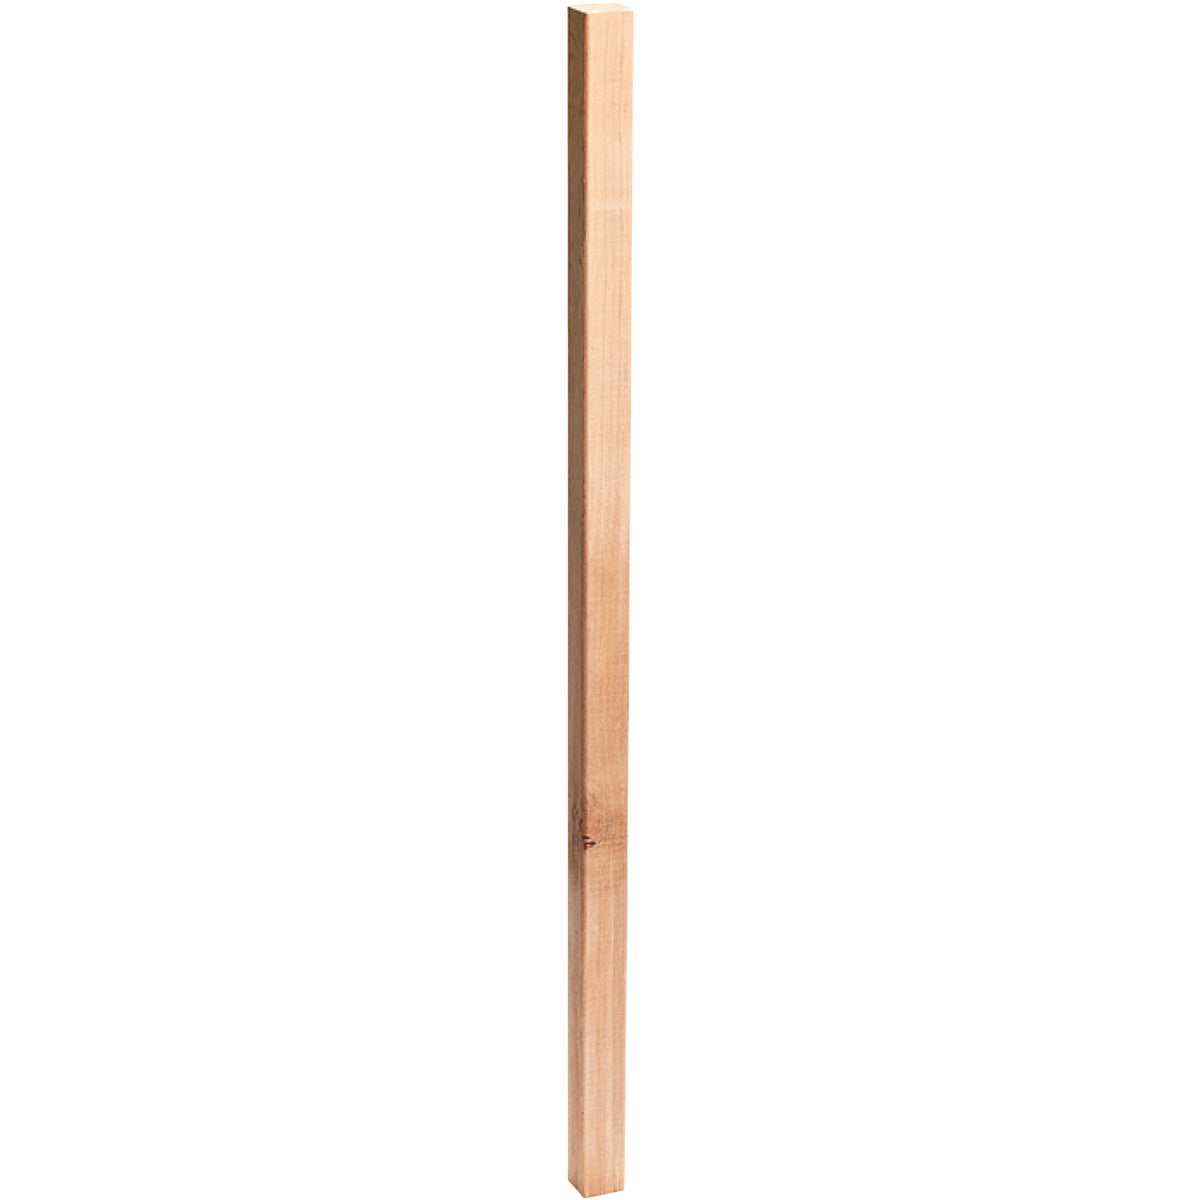 Real Wood 2 In. x 2 In. x 36 In. Cedar Square Baluster